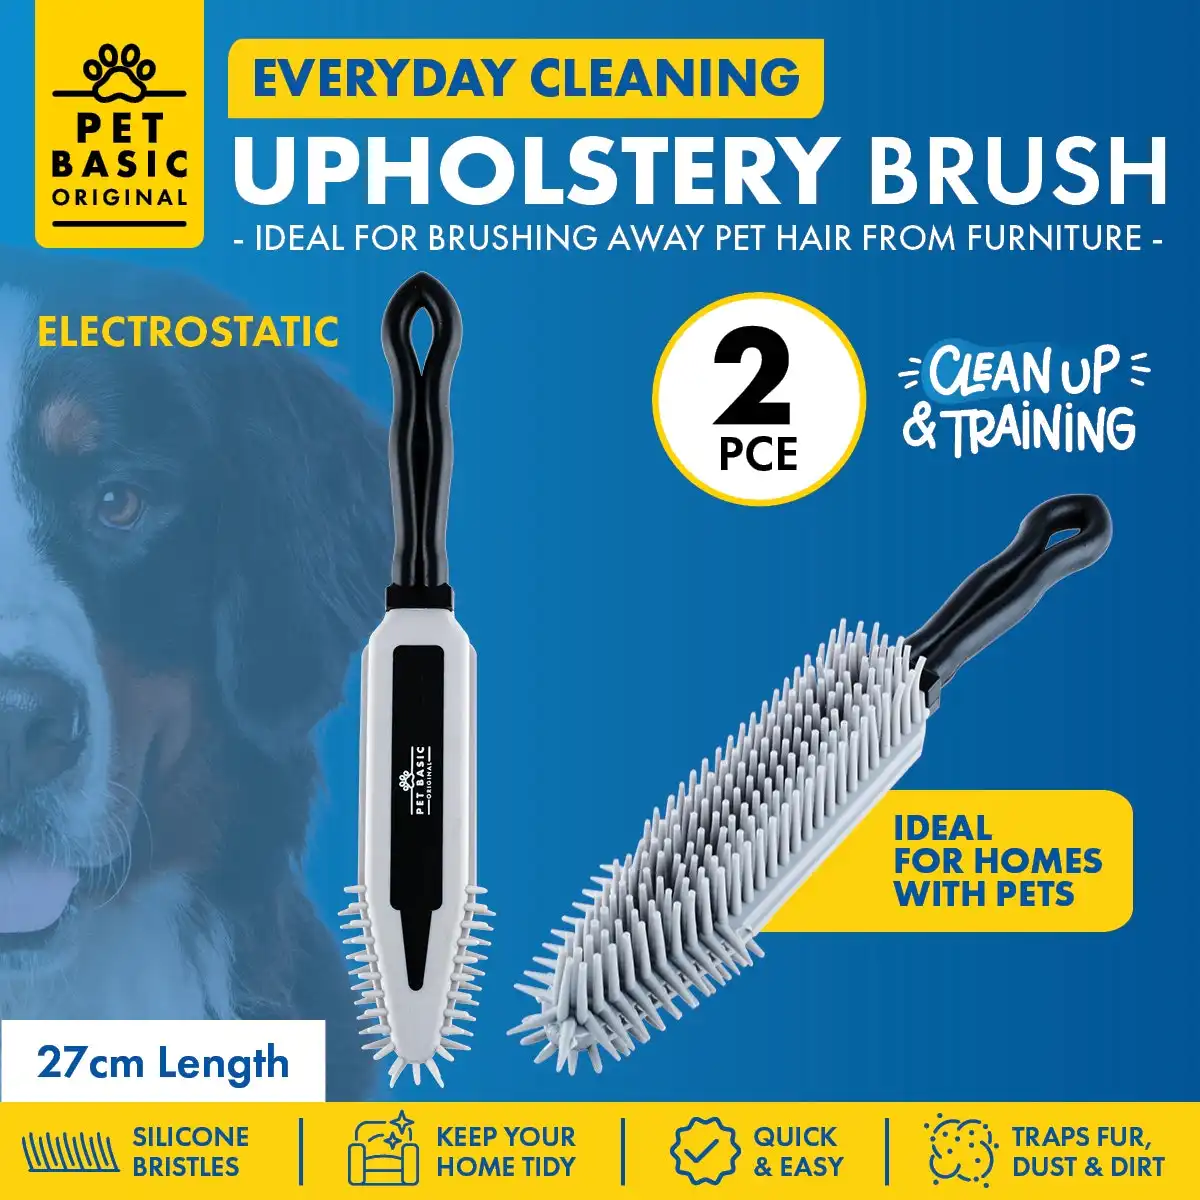 Pet Basic® 2PCE Upholstery Brush Silicone Bristles Remove Excess Fur 27cm